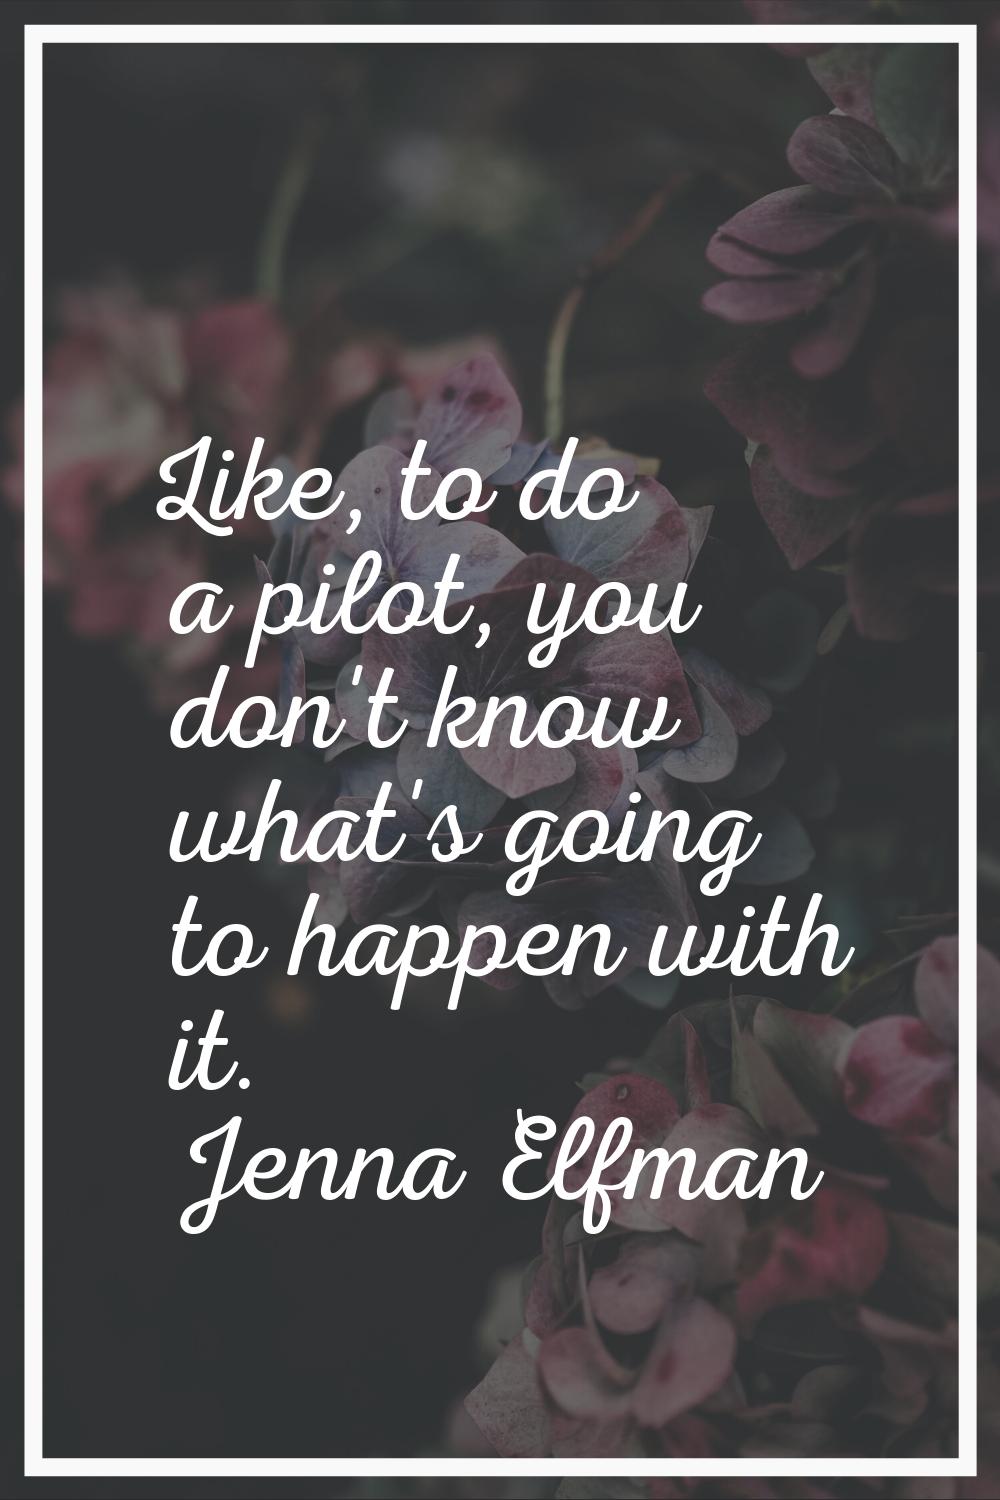 Like, to do a pilot, you don't know what's going to happen with it.